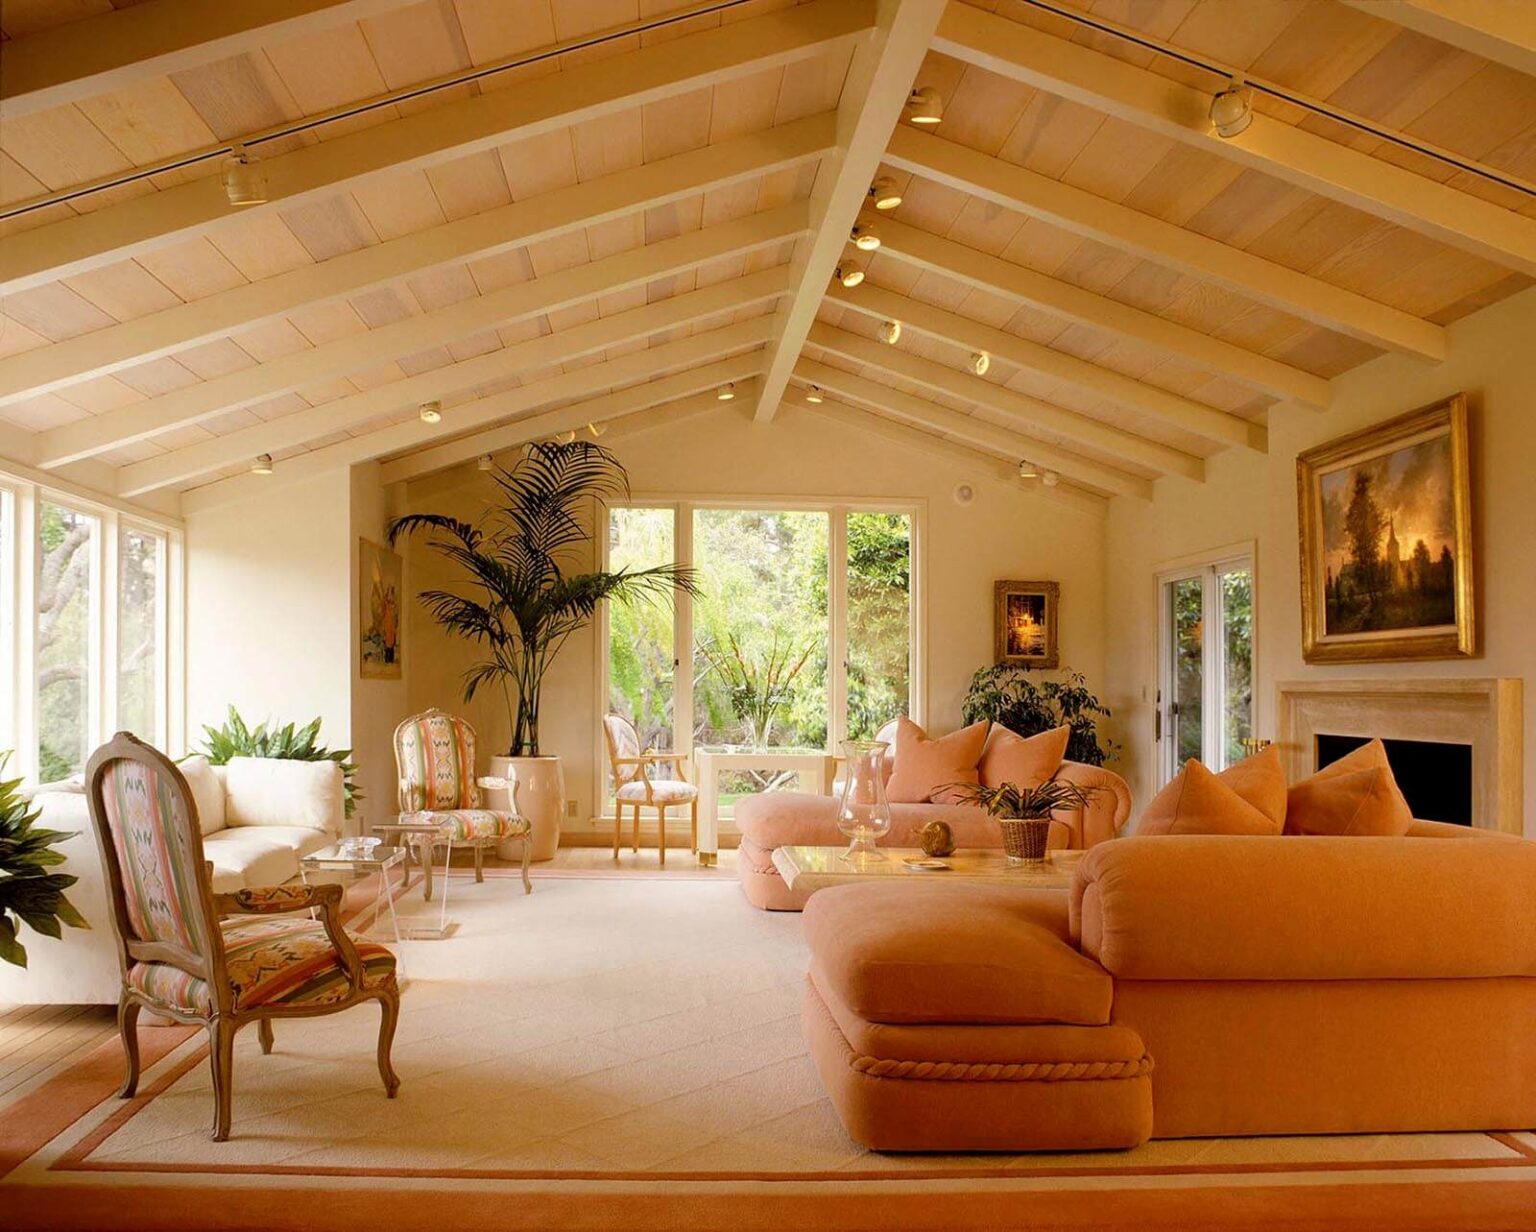 A LIVING ROOM with classical paintings, open beam ceiling, overstuffed peach colored couches and lots of natural light.- Architecture photography by Eagle Visions Photography